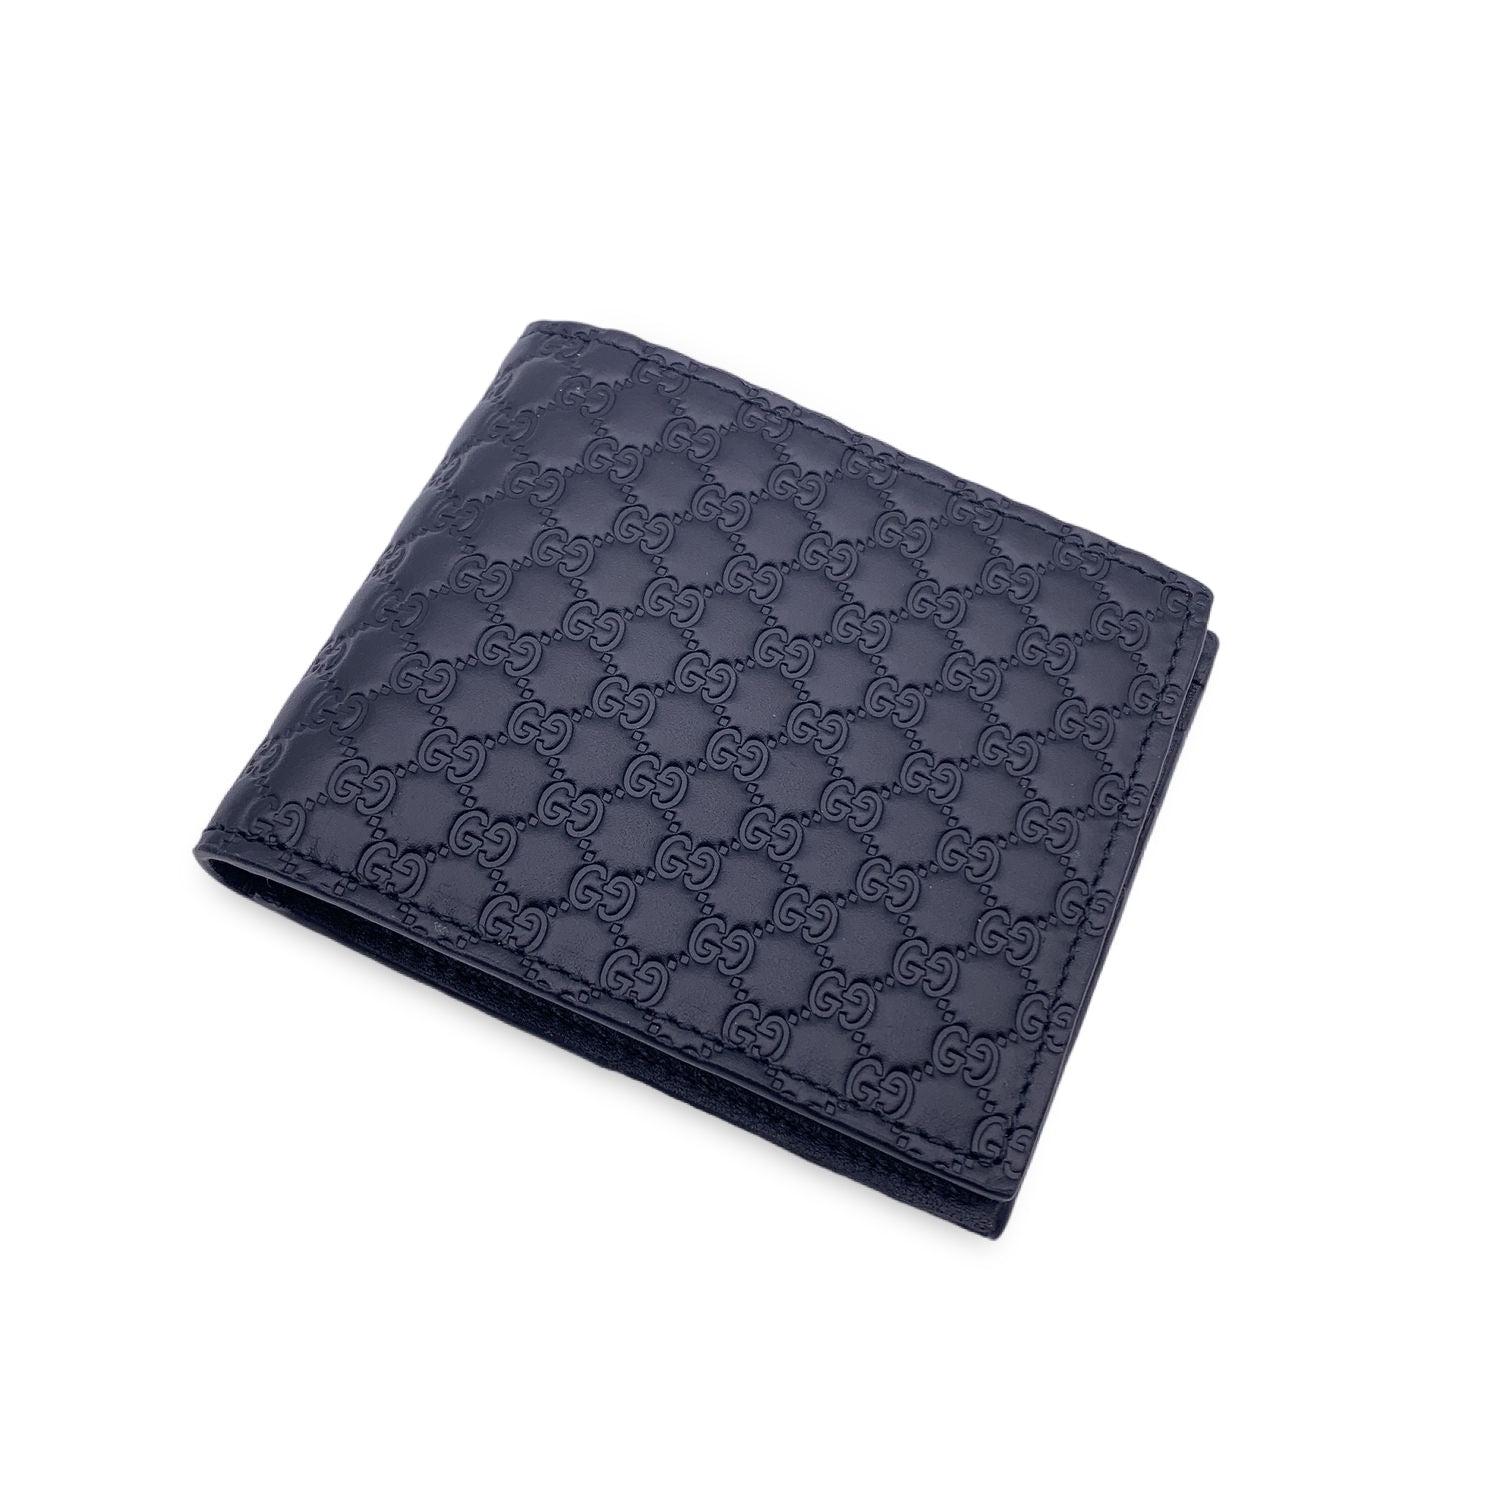 Beautiful Gucci black Microguccissima leather bifold wallet. 1 bill compartment, 1 coin compartment, 1 open pocket and 4 credit card slots. 'Gucci - Made in Italy' and serial number engraved inside. Details MATERIAL: Leather COLOR: Black MODEL: -